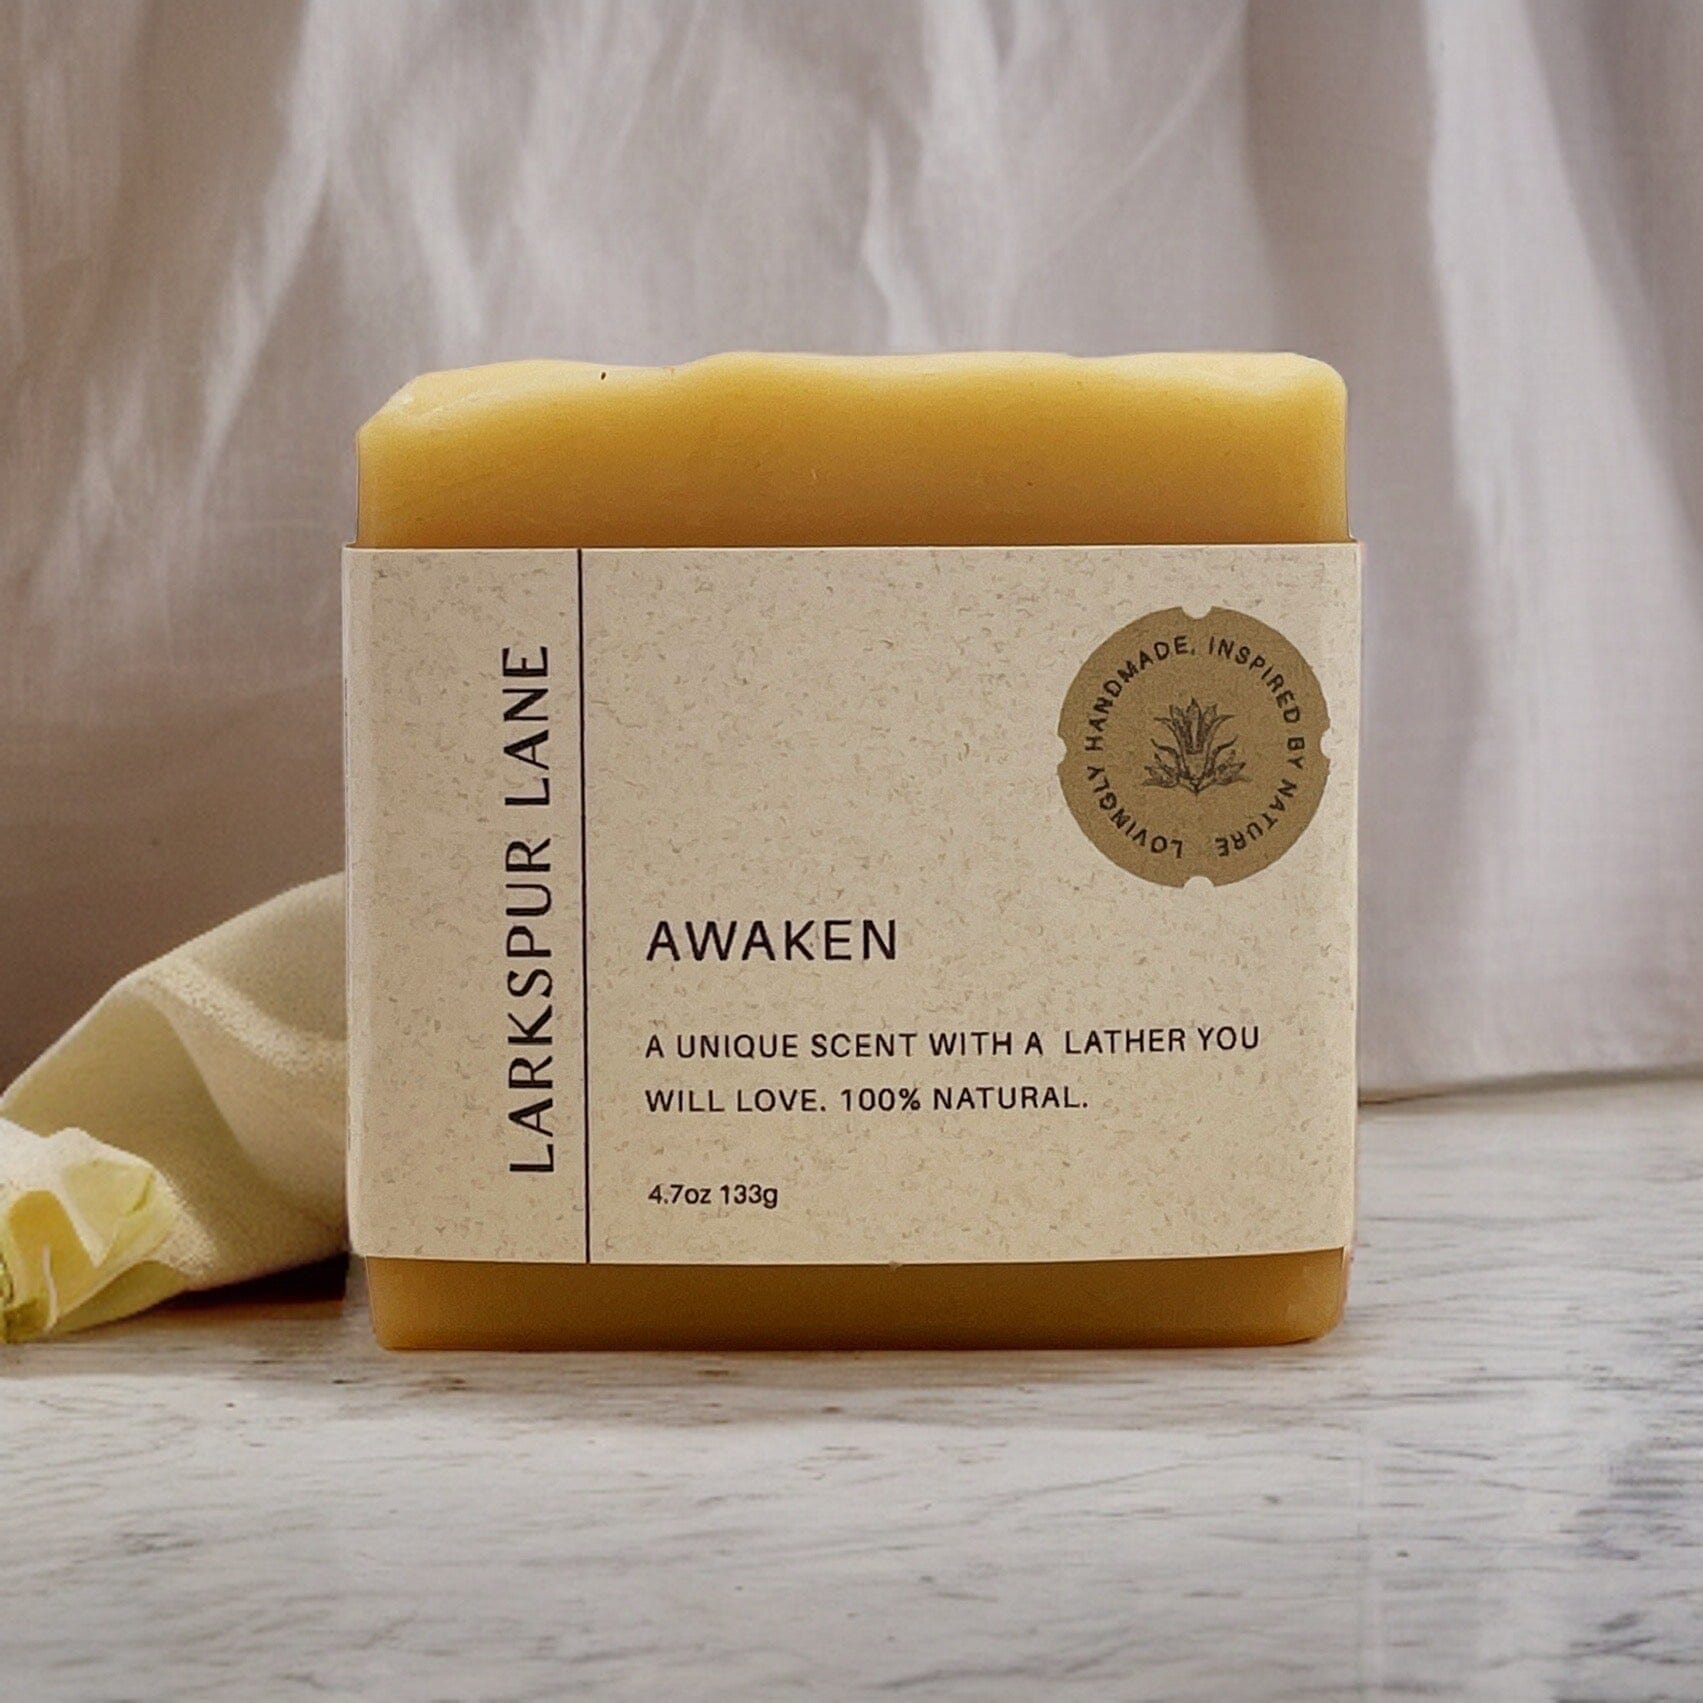 Larkspur Lane’s Awaken soap sitting on a table with a cloth hanging behind it